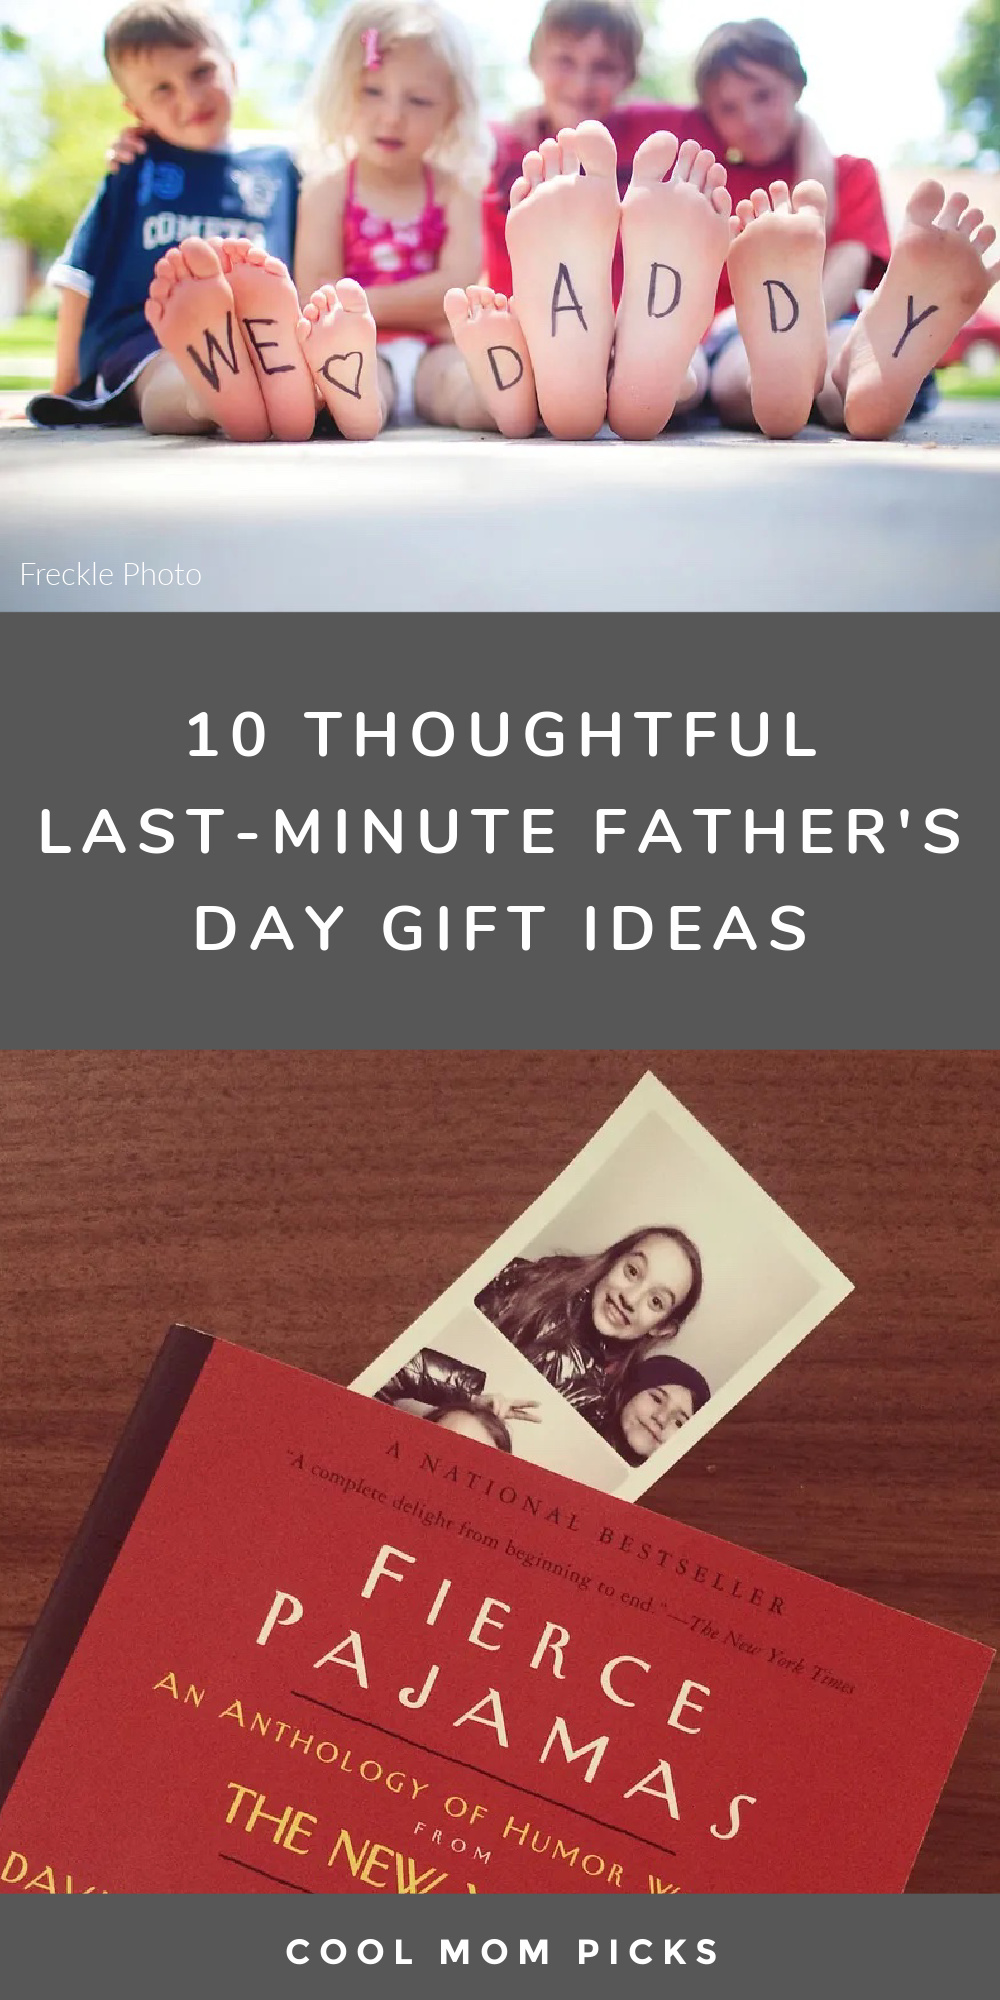 10 thoughtful last-minute Father's Day gift ideas at Cool Mom Picks